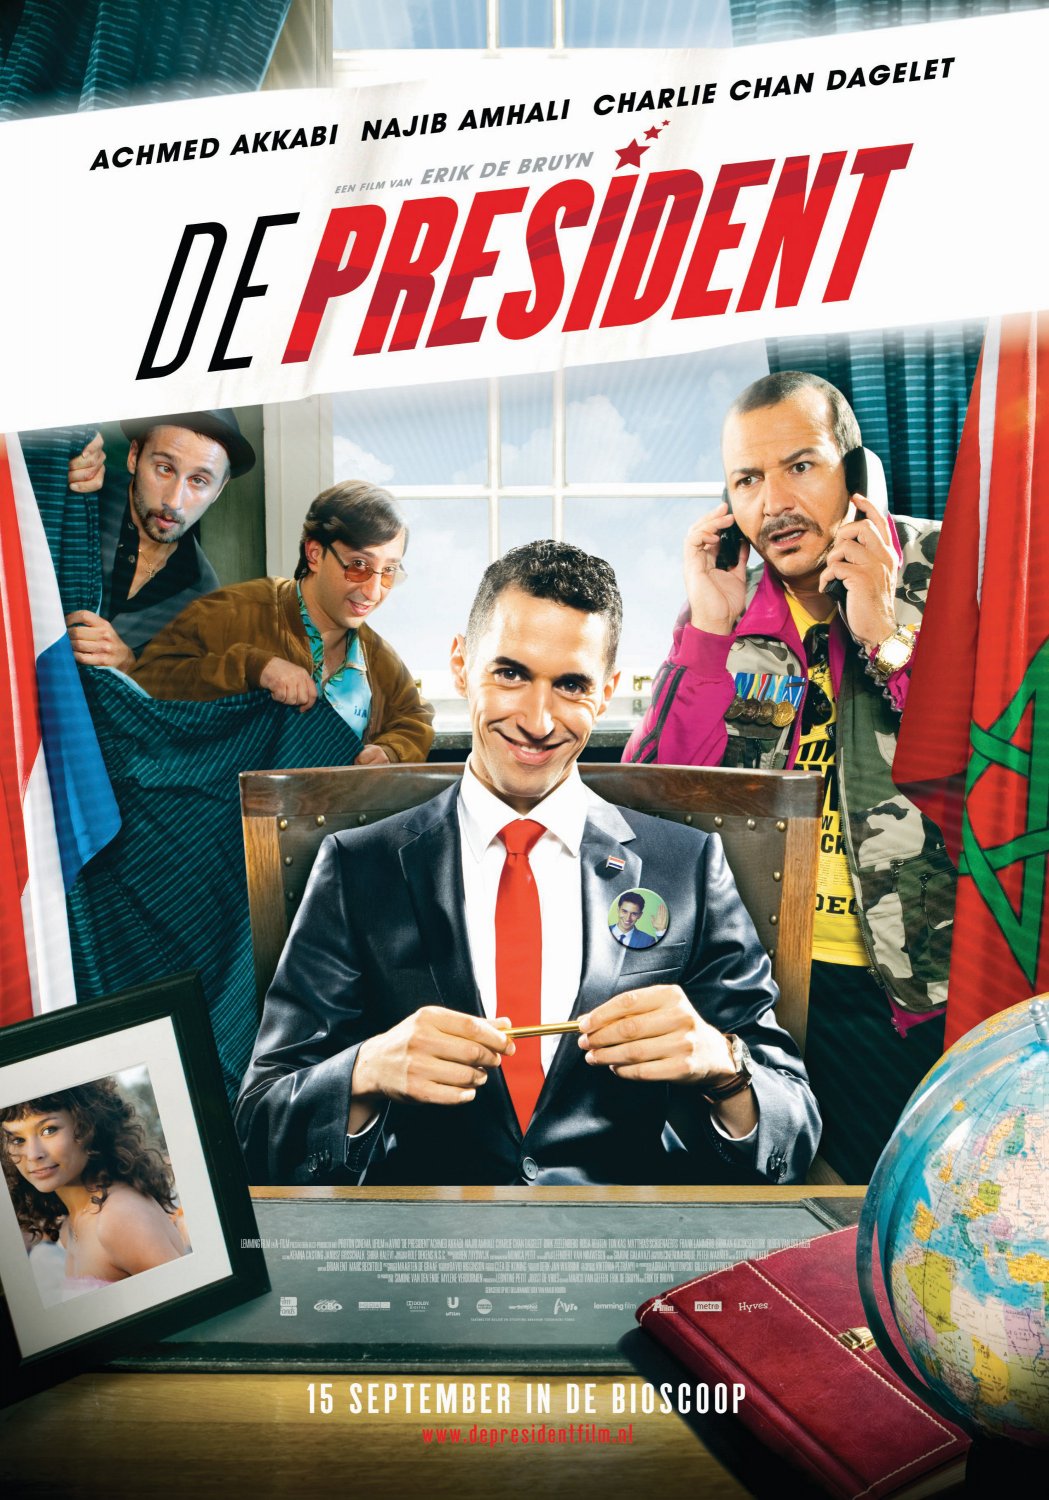 Extra Large Movie Poster Image for De president 